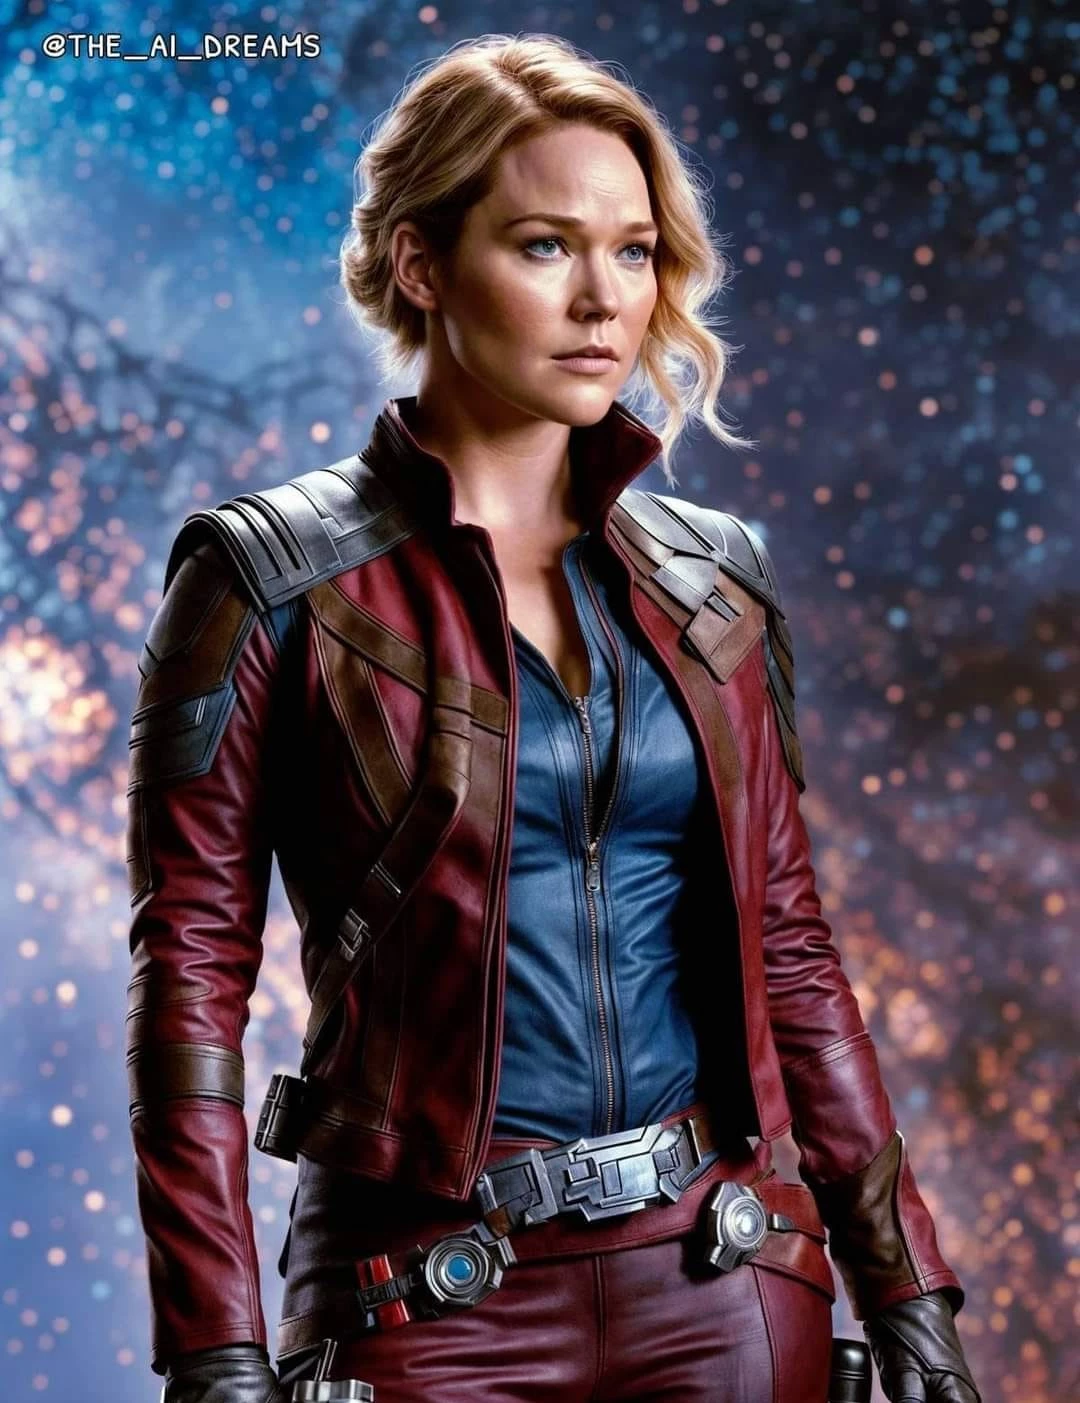 Petra Quill, The Female Star-Lord, Is As Hilarious As Her Male Counterpart